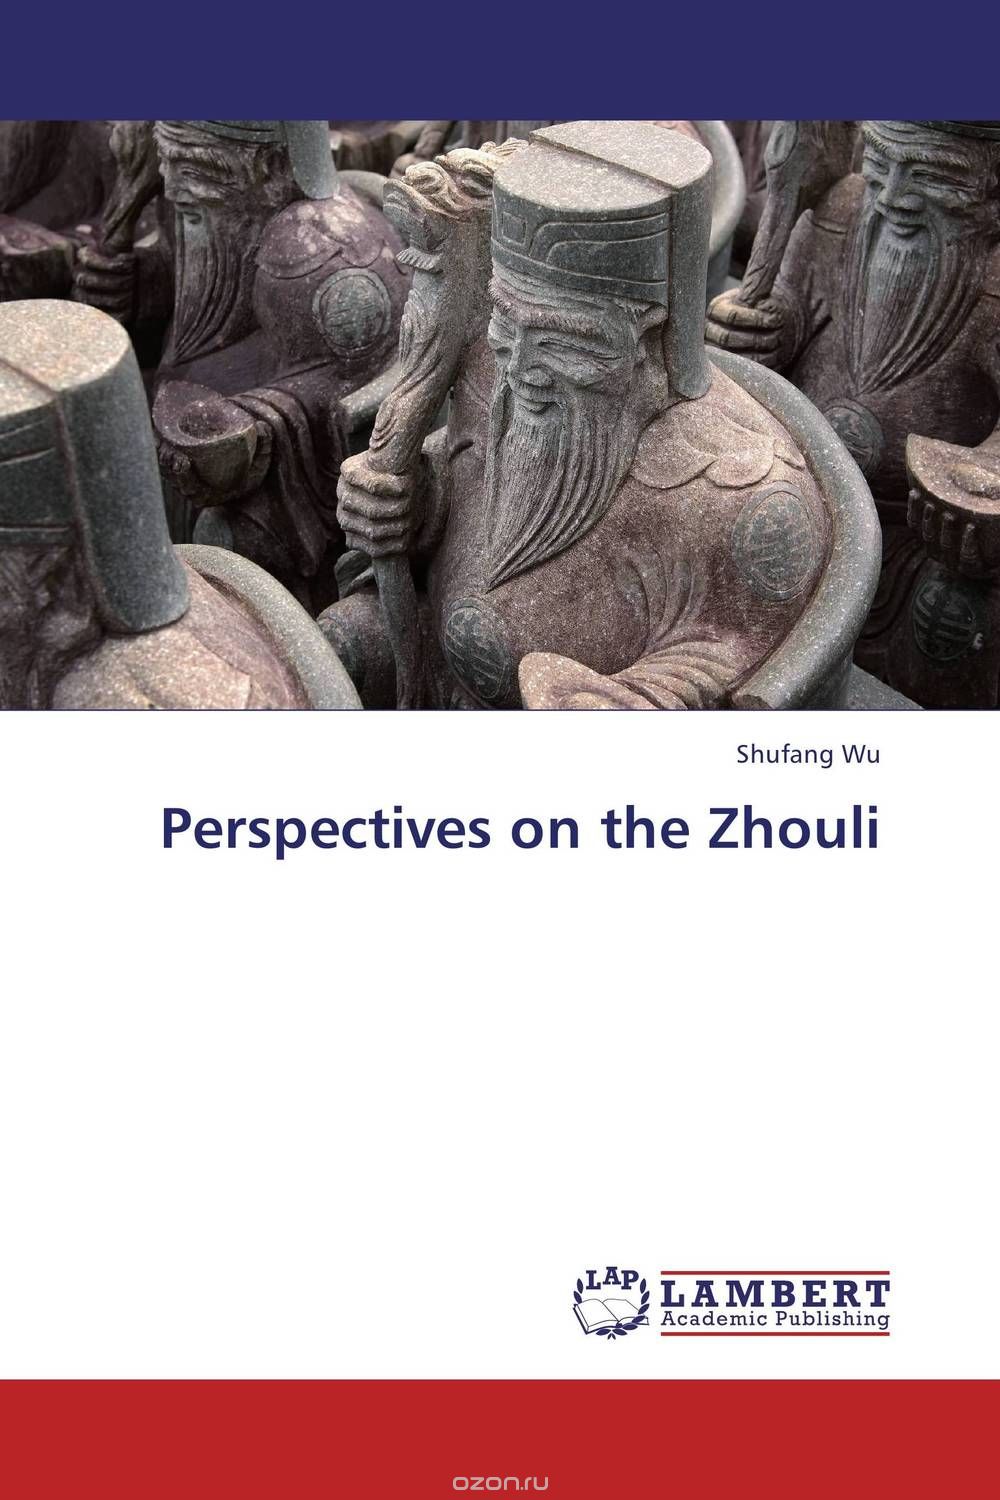 Perspectives on the Zhouli